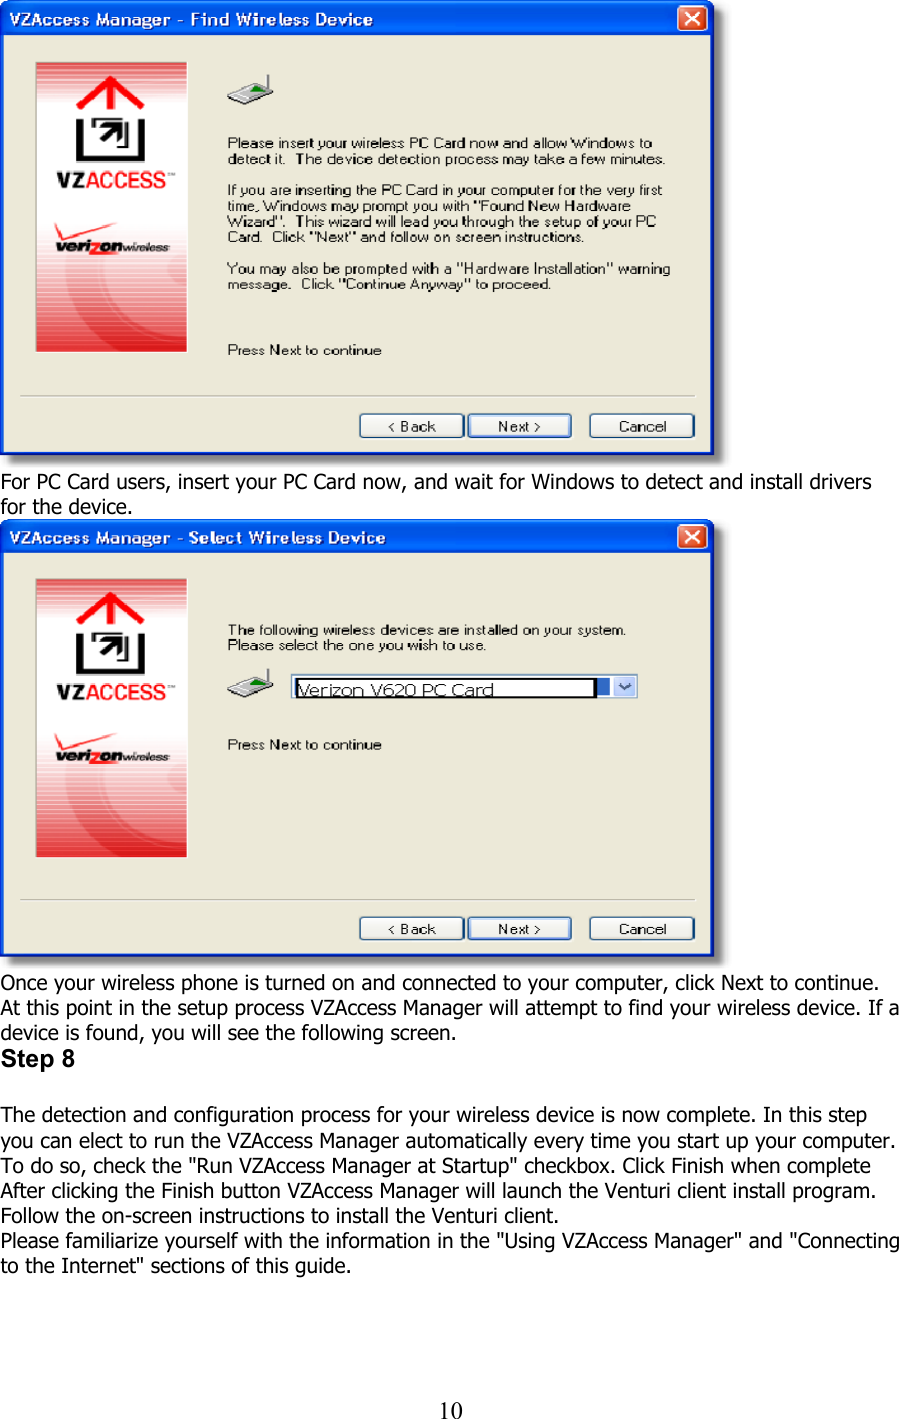  10 For PC Card users, insert your PC Card now, and wait for Windows to detect and install drivers for the device.  Once your wireless phone is turned on and connected to your computer, click Next to continue. At this point in the setup process VZAccess Manager will attempt to find your wireless device. If a device is found, you will see the following screen. Step 8  The detection and configuration process for your wireless device is now complete. In this step you can elect to run the VZAccess Manager automatically every time you start up your computer. To do so, check the &quot;Run VZAccess Manager at Startup&quot; checkbox. Click Finish when complete After clicking the Finish button VZAccess Manager will launch the Venturi client install program. Follow the on-screen instructions to install the Venturi client. Please familiarize yourself with the information in the &quot;Using VZAccess Manager&quot; and &quot;Connecting to the Internet&quot; sections of this guide.   